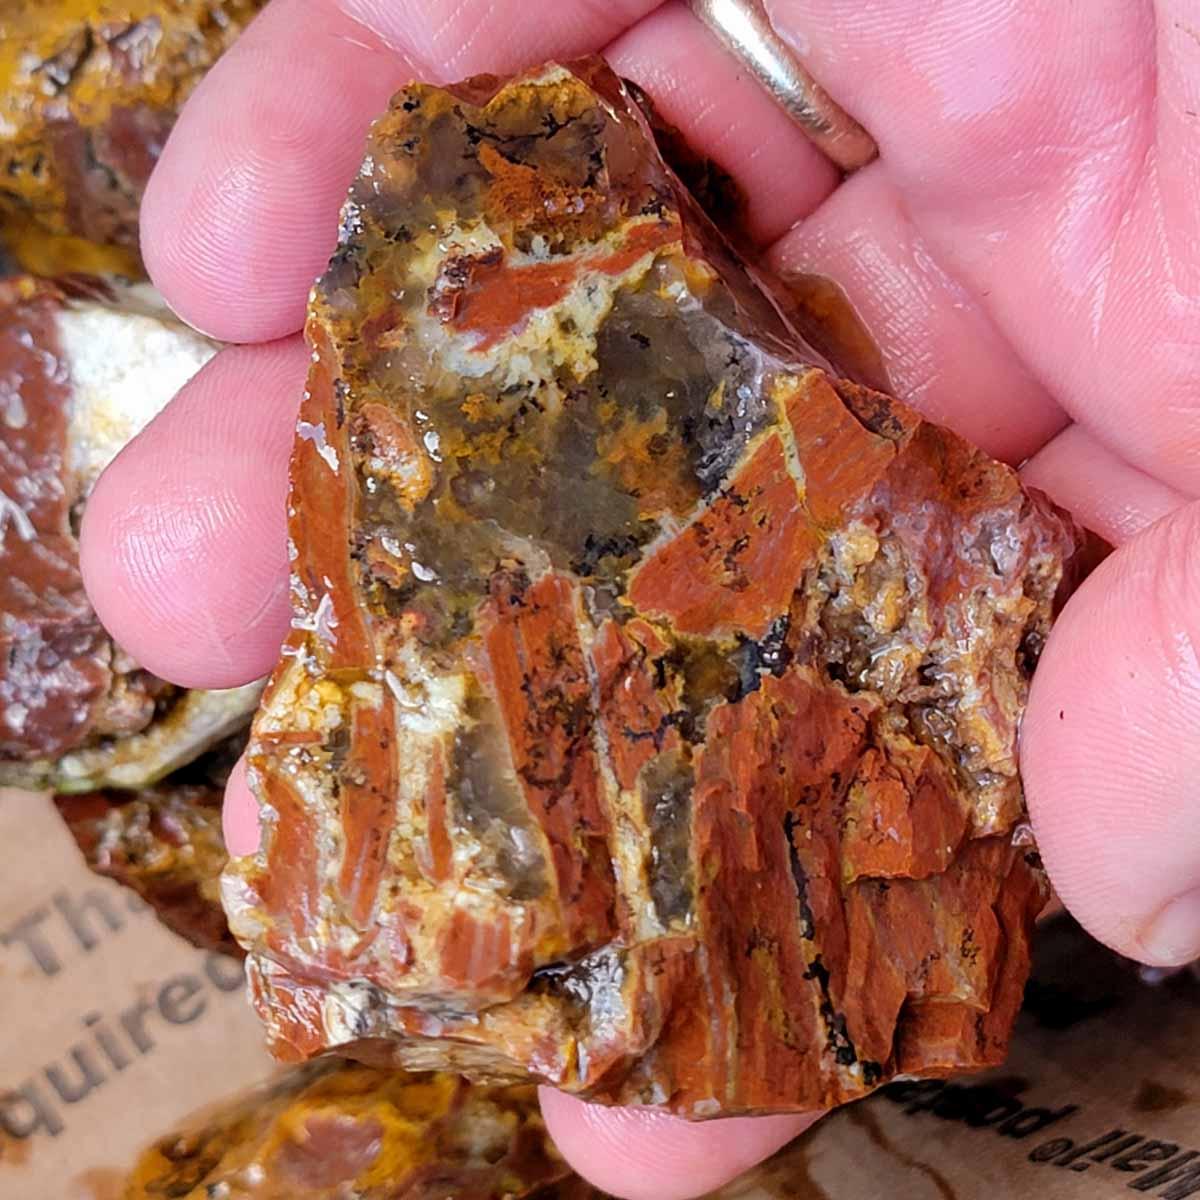 Tumbling Trimmer Eagle Rock Plume Agate Rough Flatrate Box! - Lapidary Central